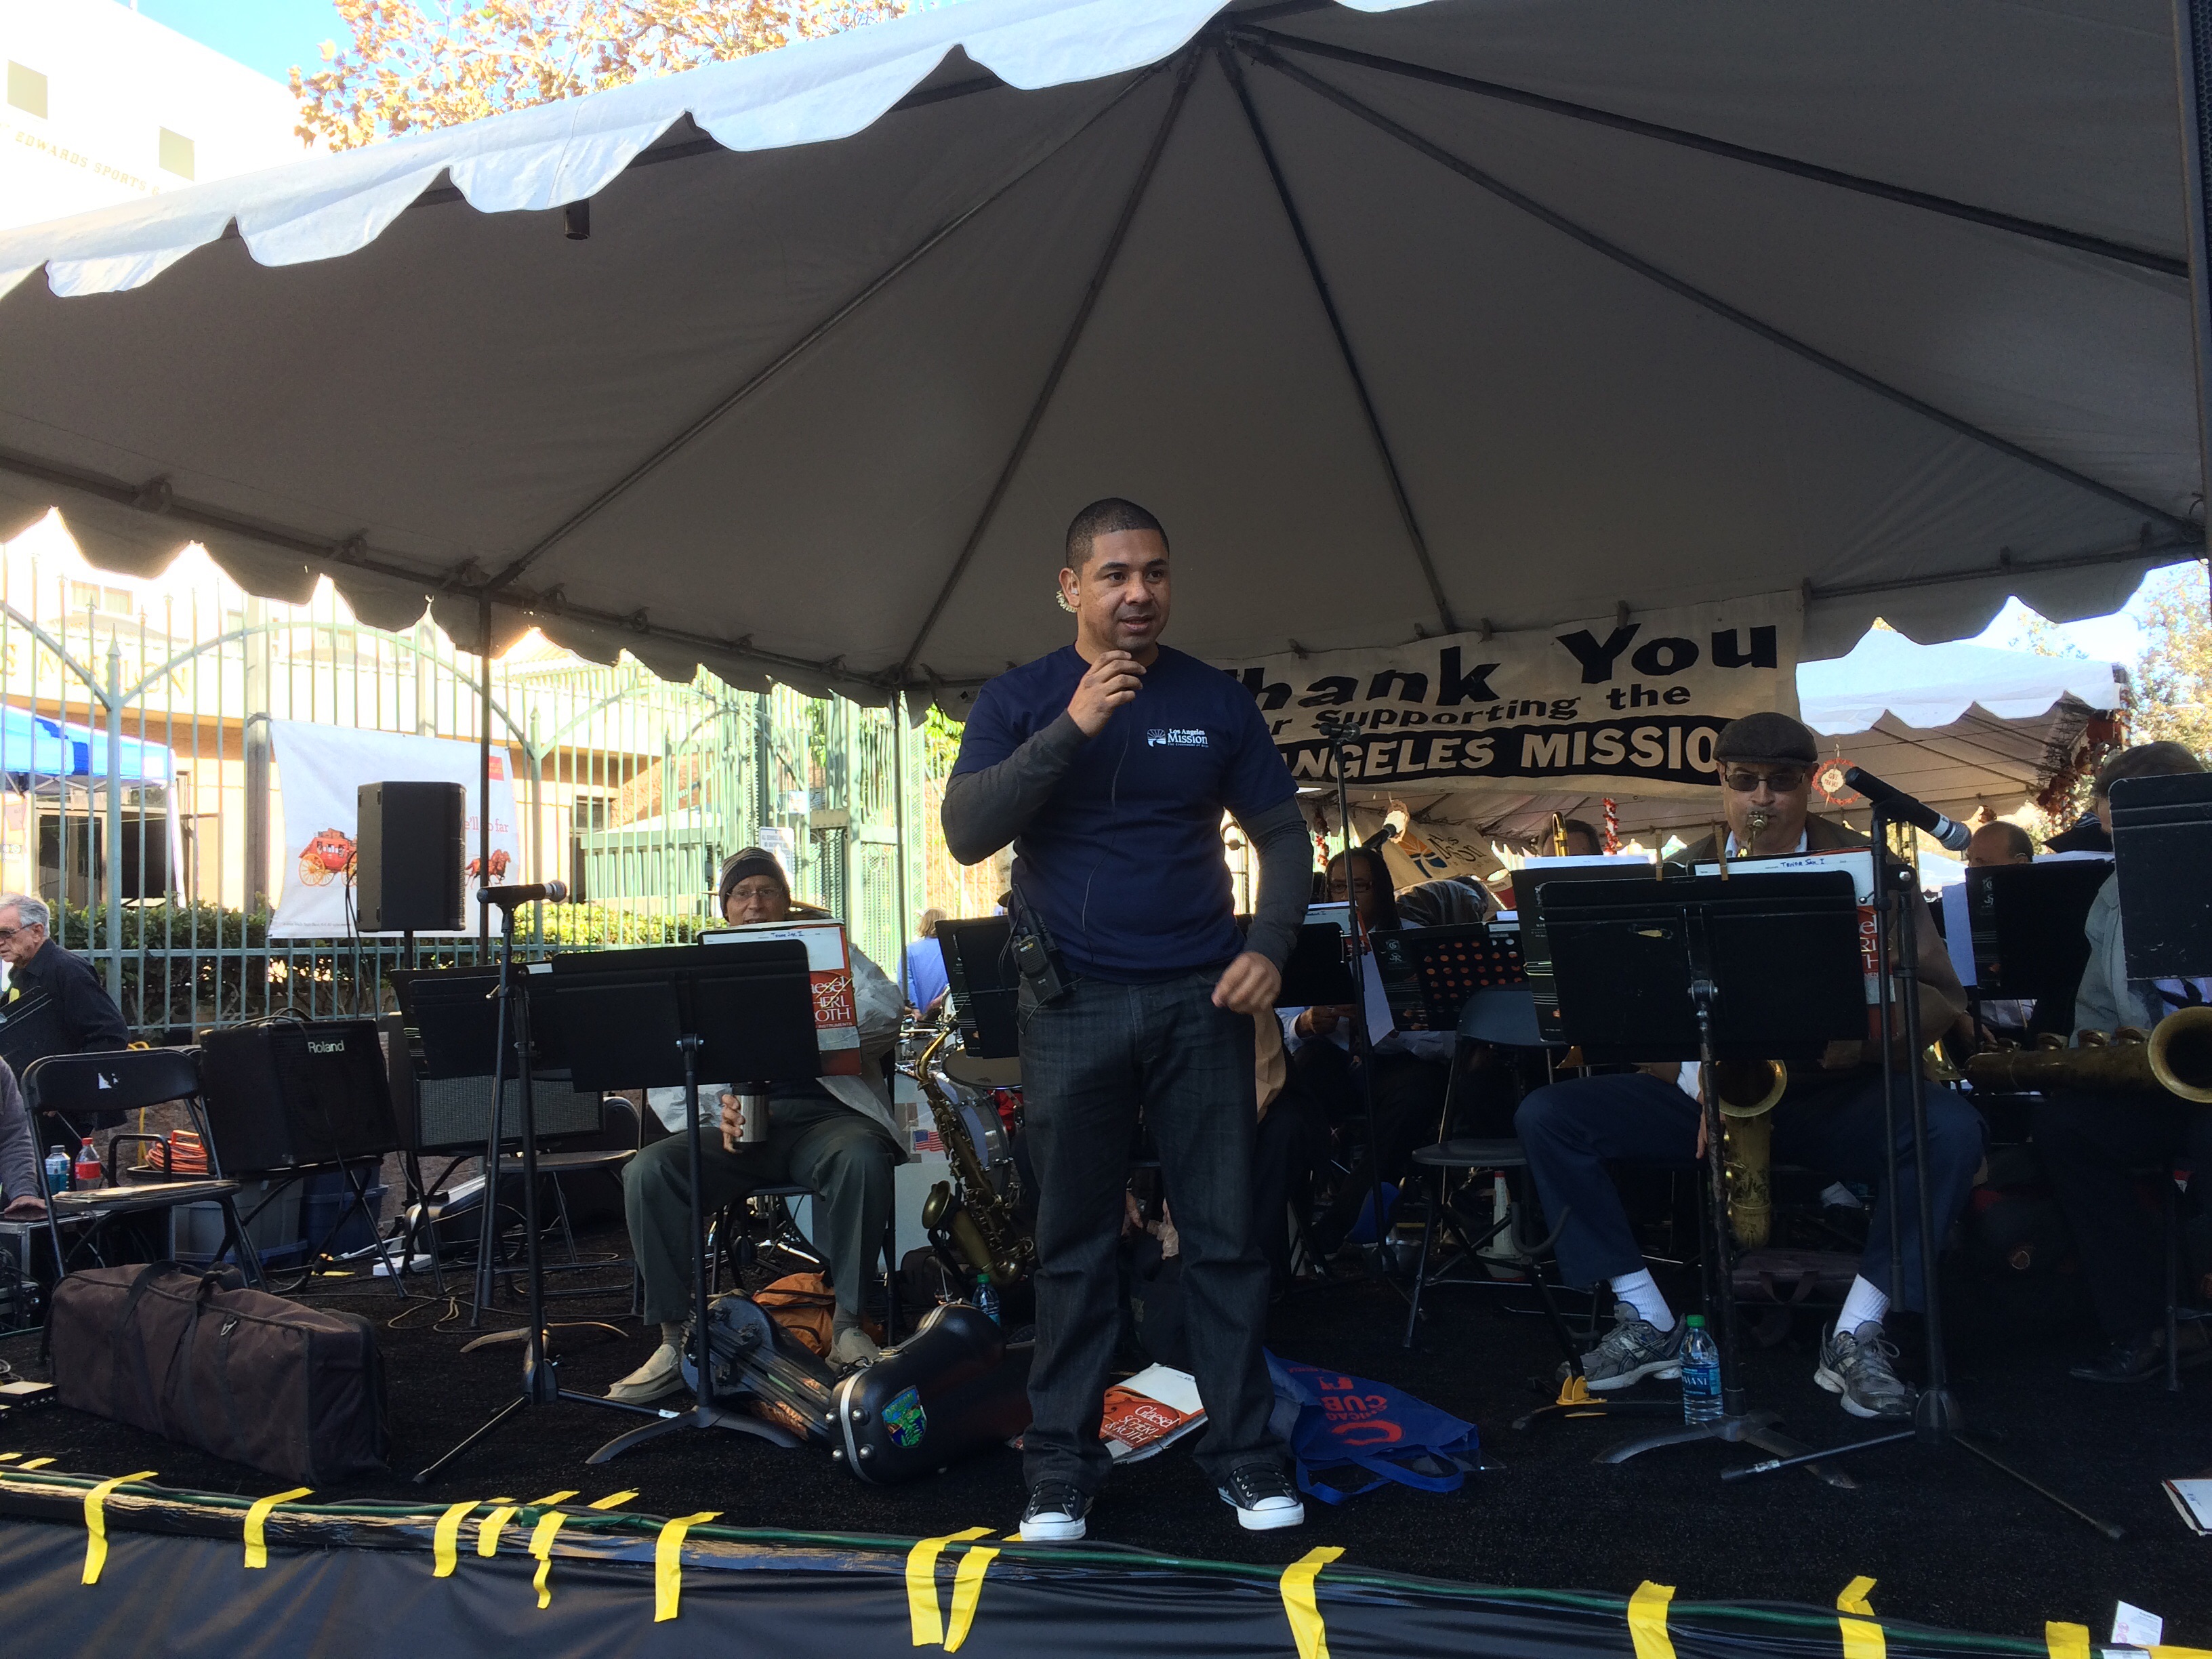 Performing at the Los Angeles Mission Thanksgiving Block party. A lot of families were fed with a warm meal.